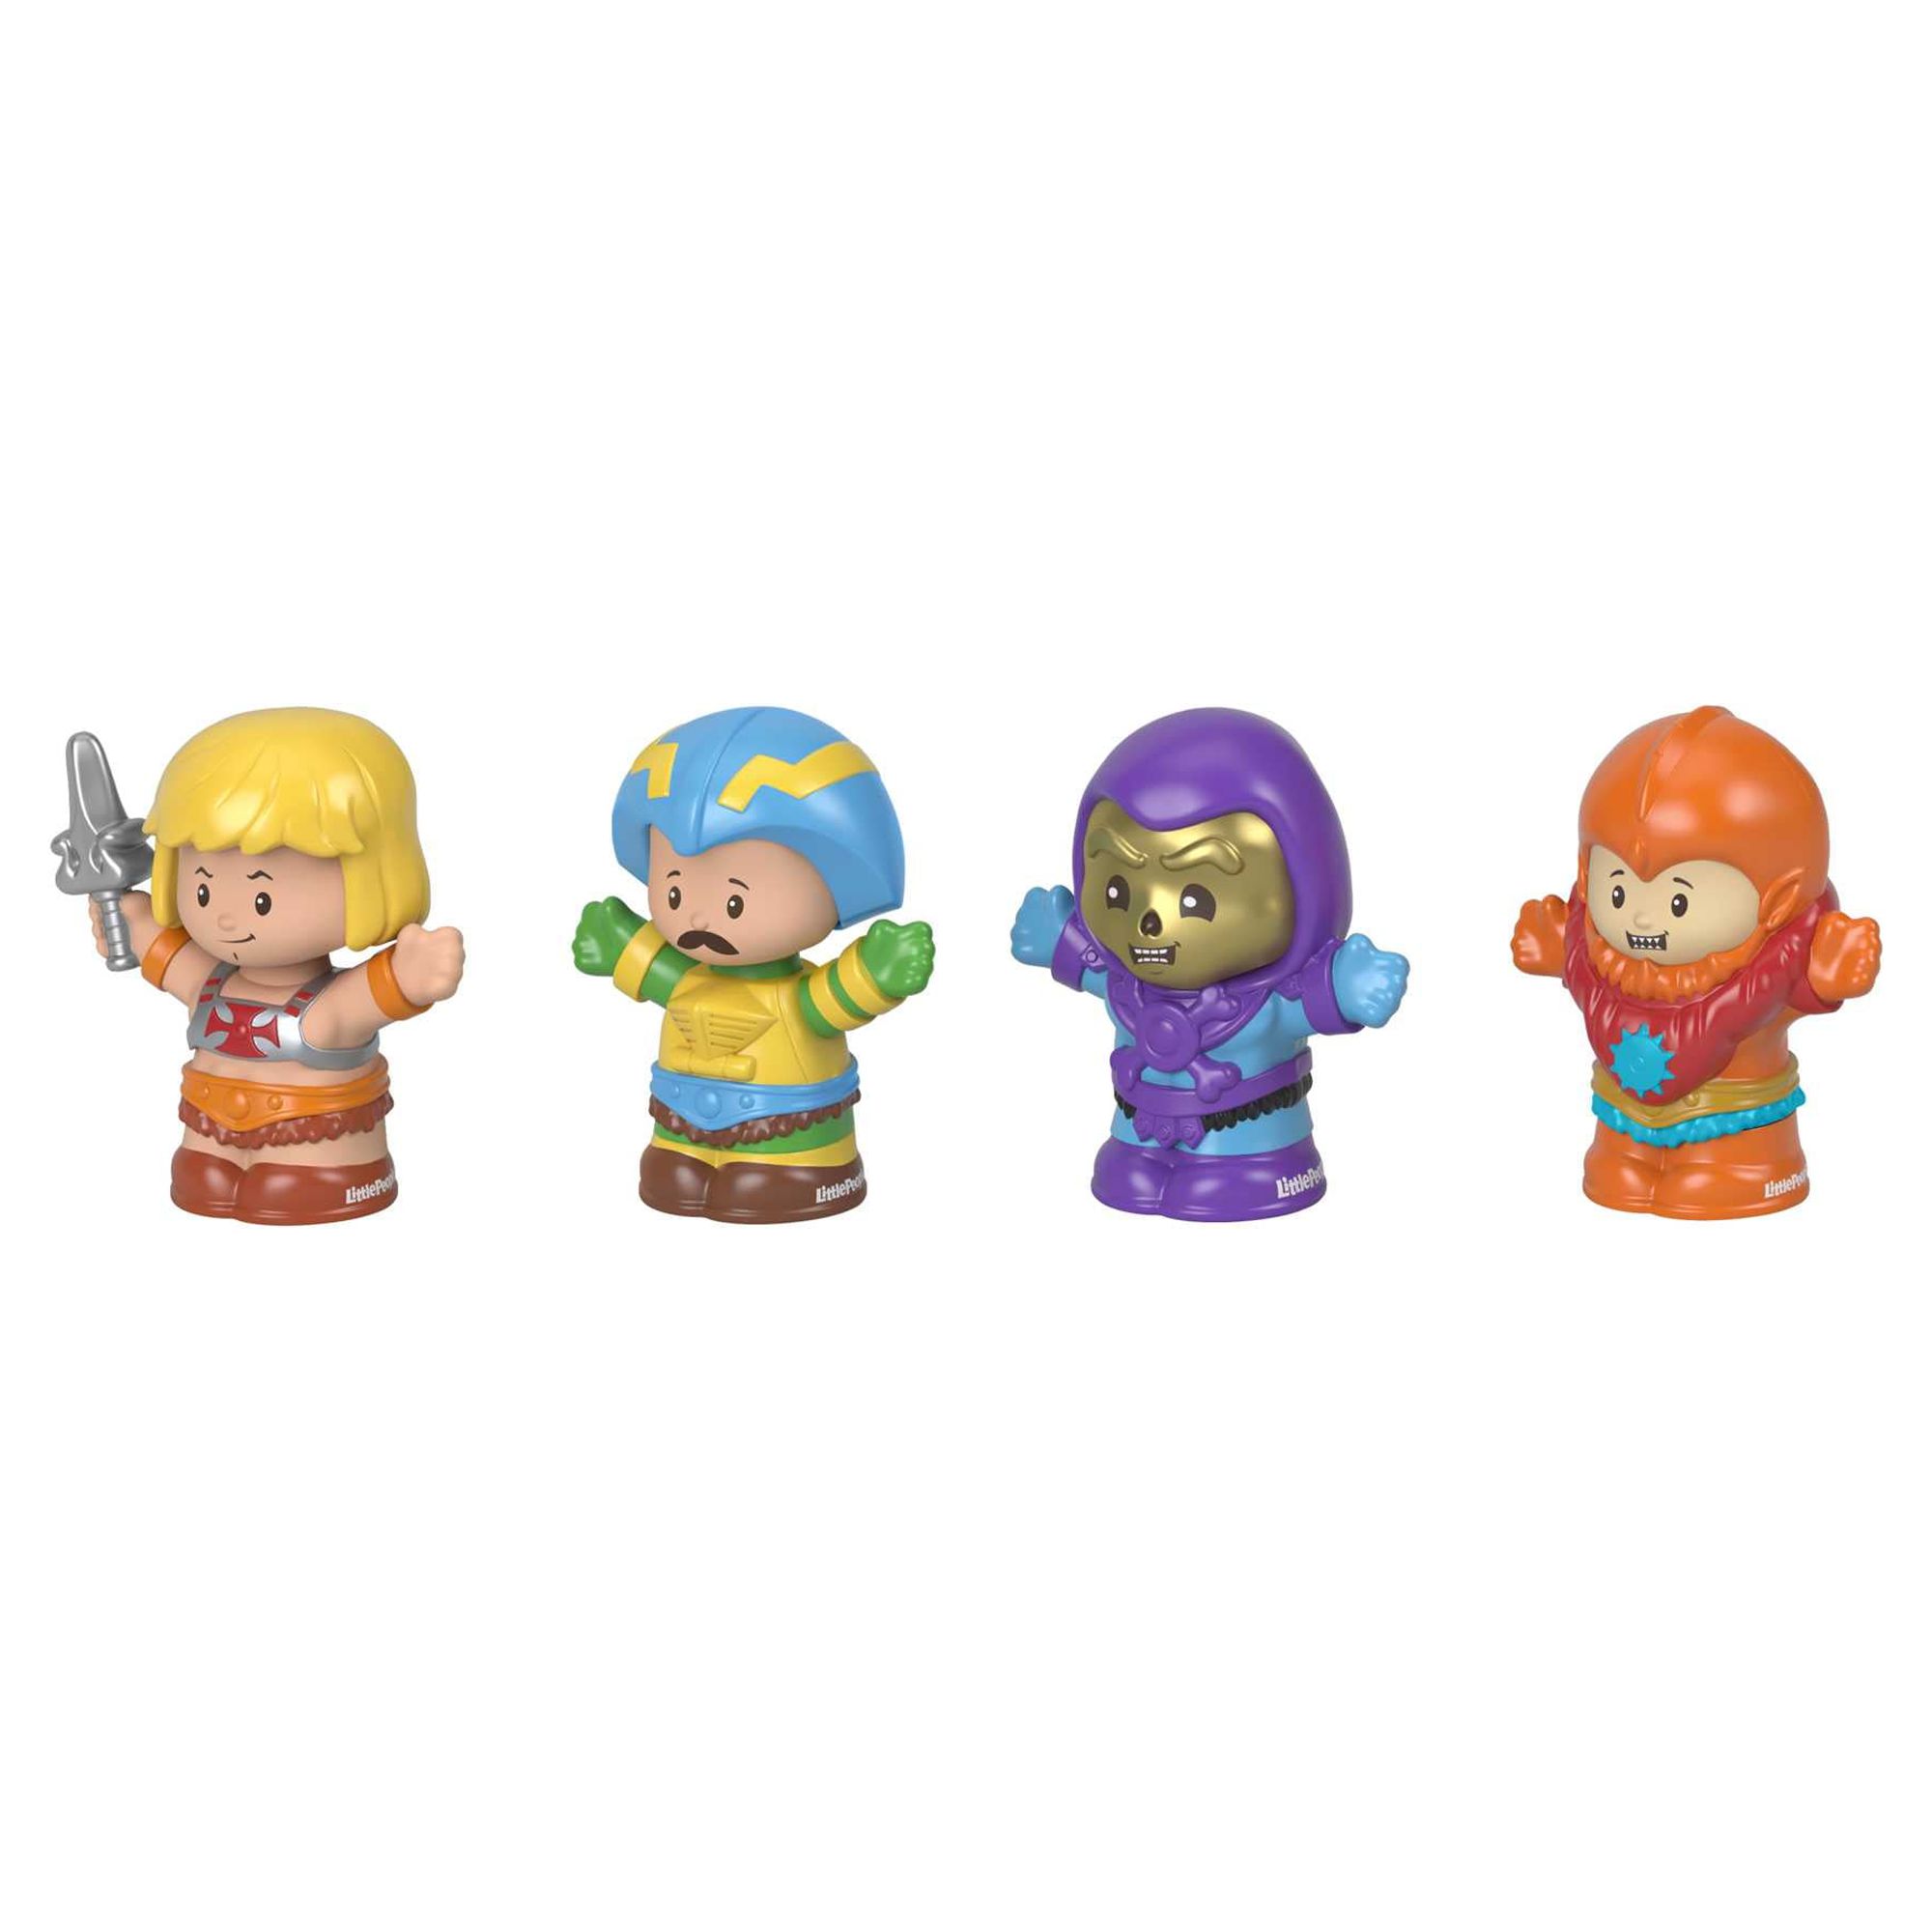 Little People Collector Masters of the Universe Special Edition Set for Adults & Fans, 4 Figures - image 4 of 5